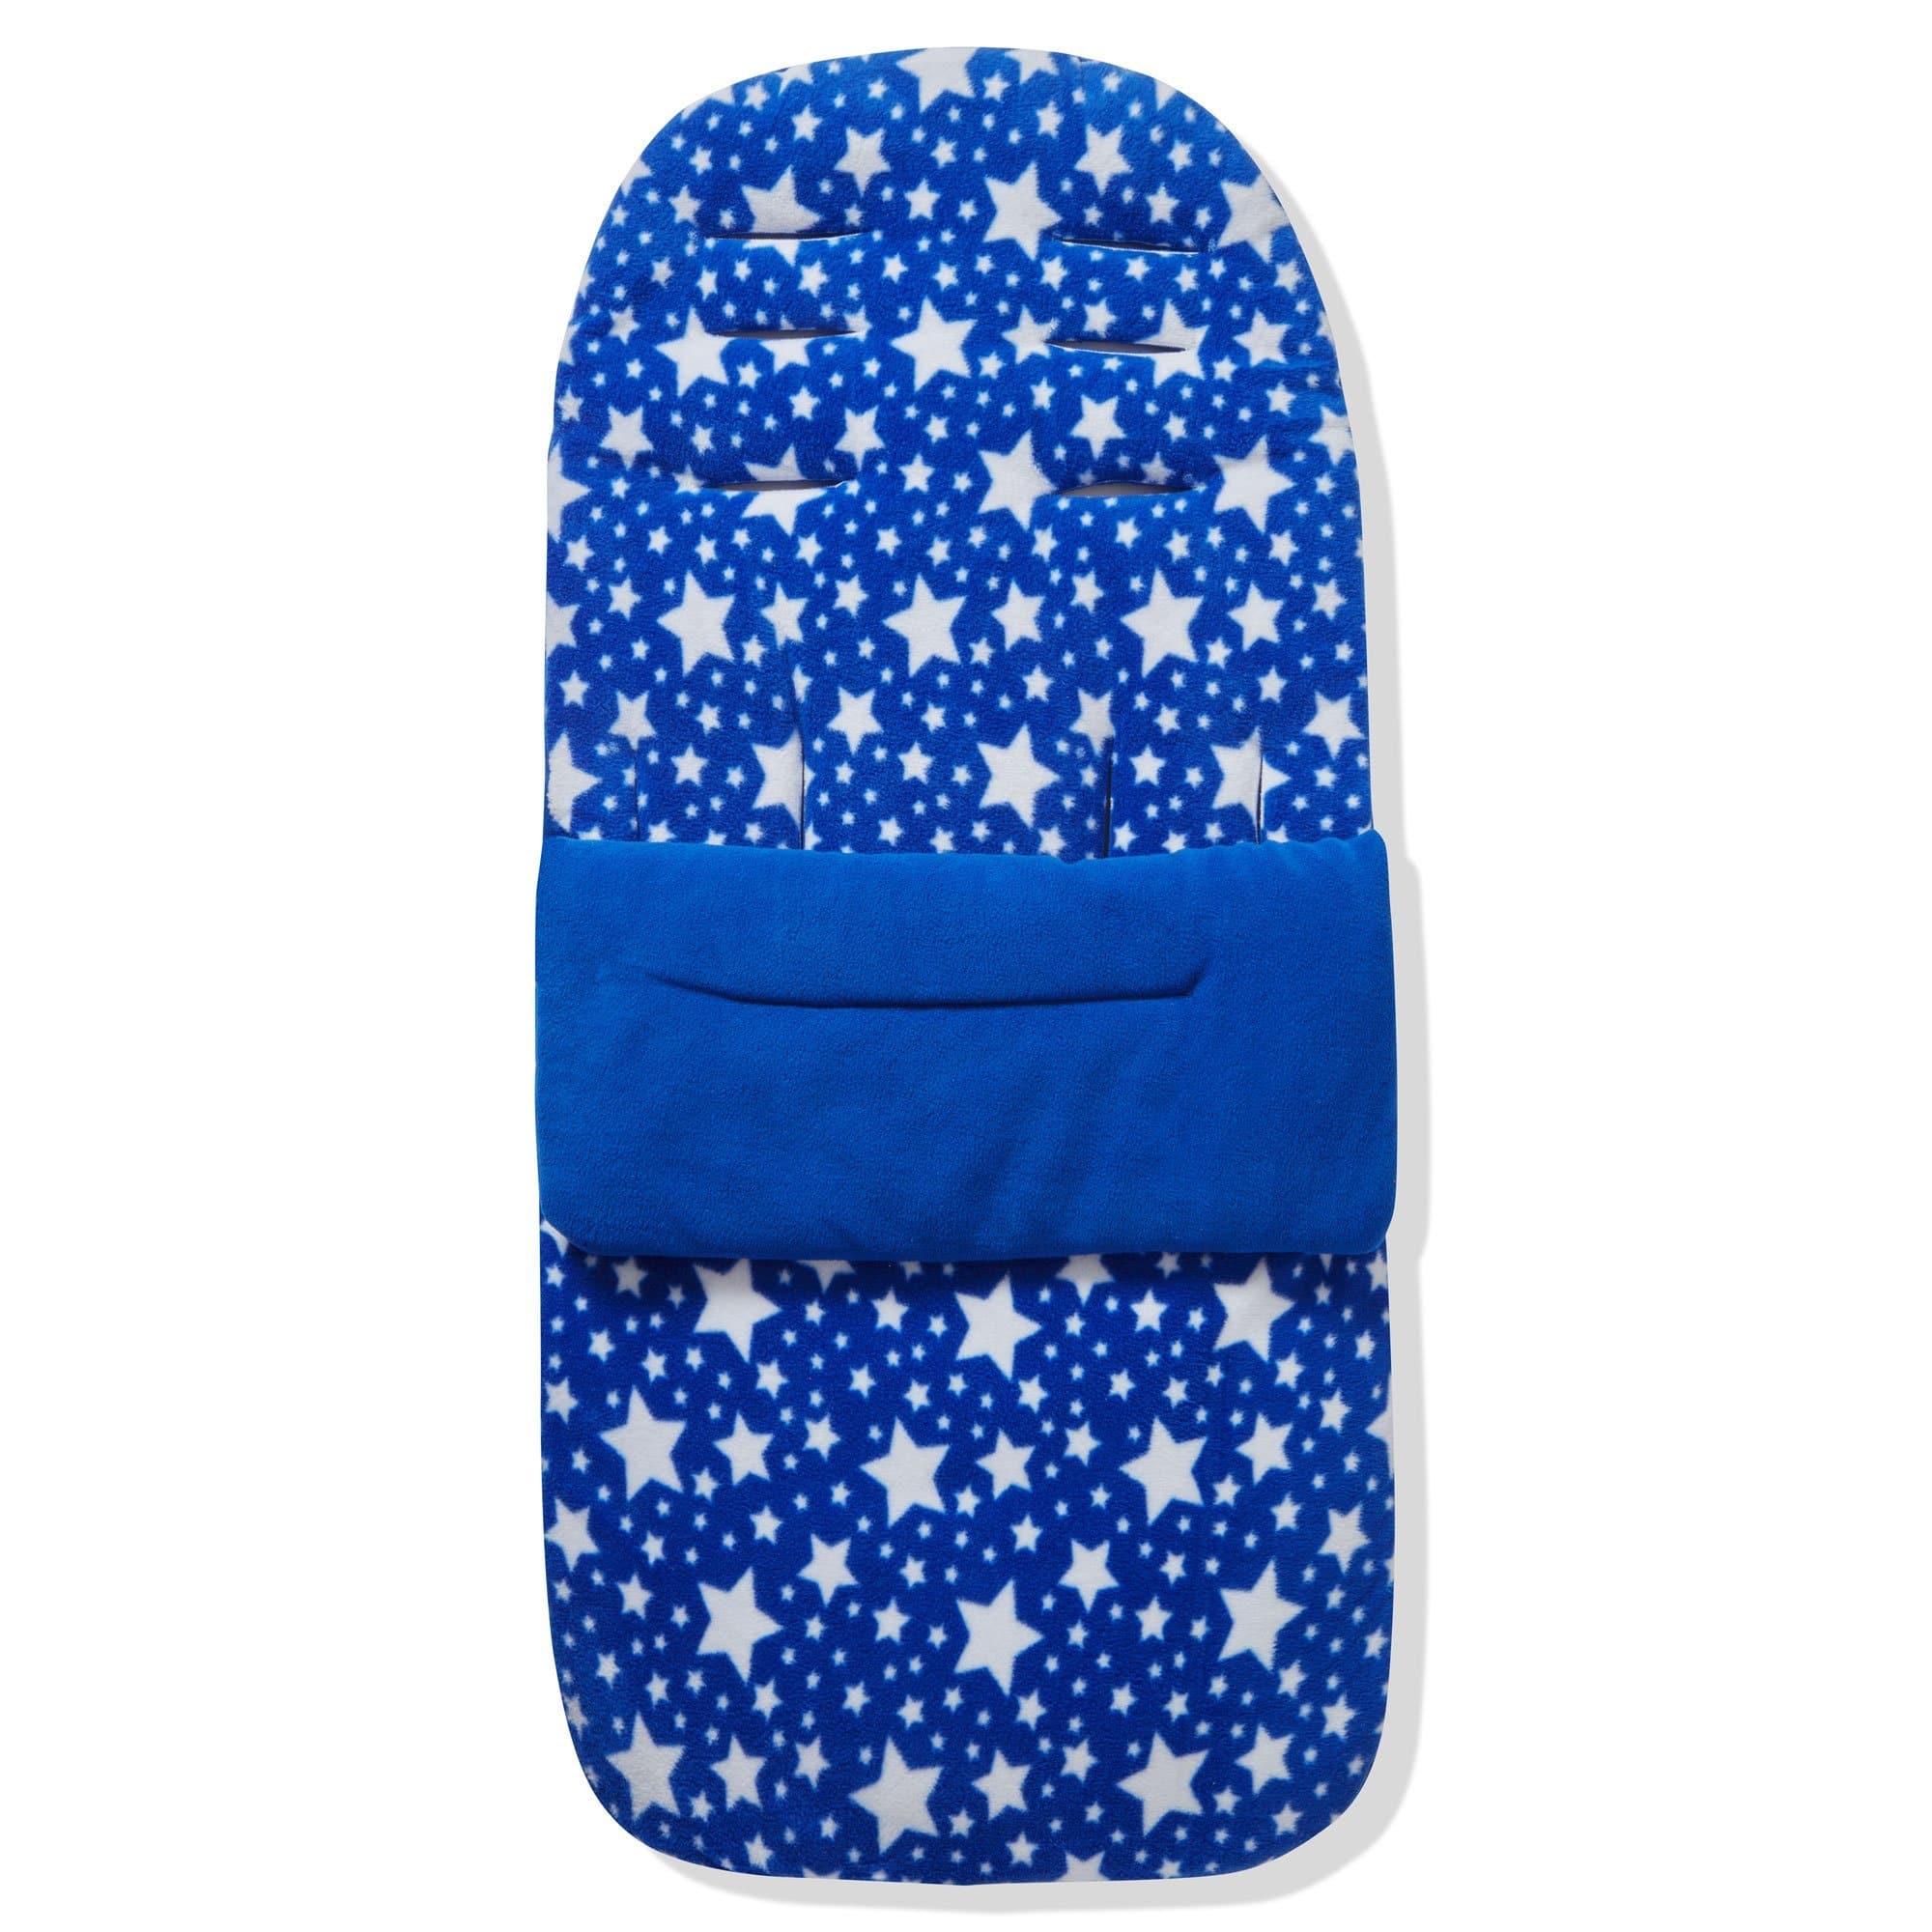 Fleece Footmuff / Cosy Toes Compatible with Babyzen - Blue Star / Fits All Models | For Your Little One